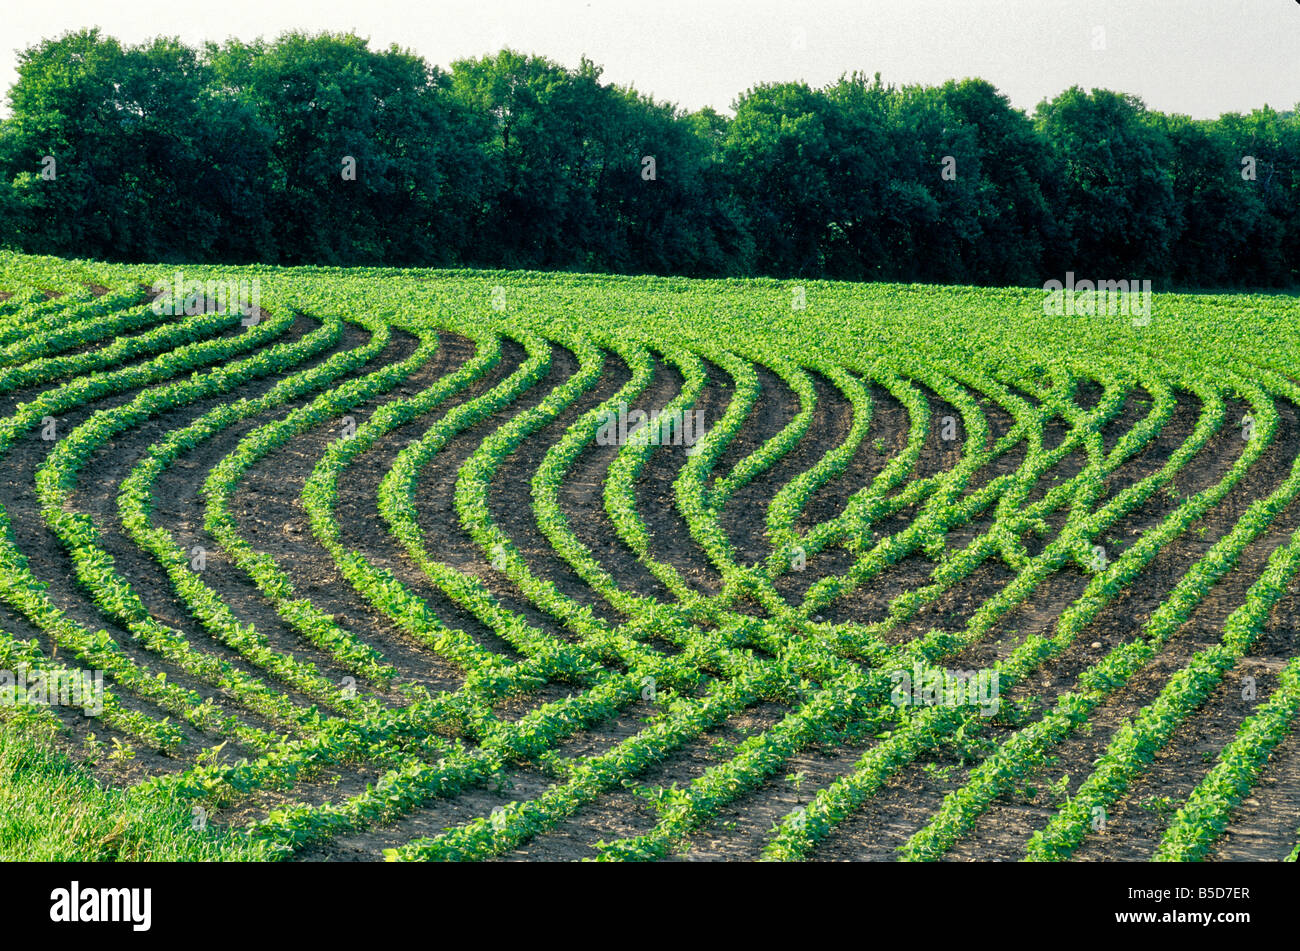 Soybeans, young plants growing in contoured field. Stock Photo